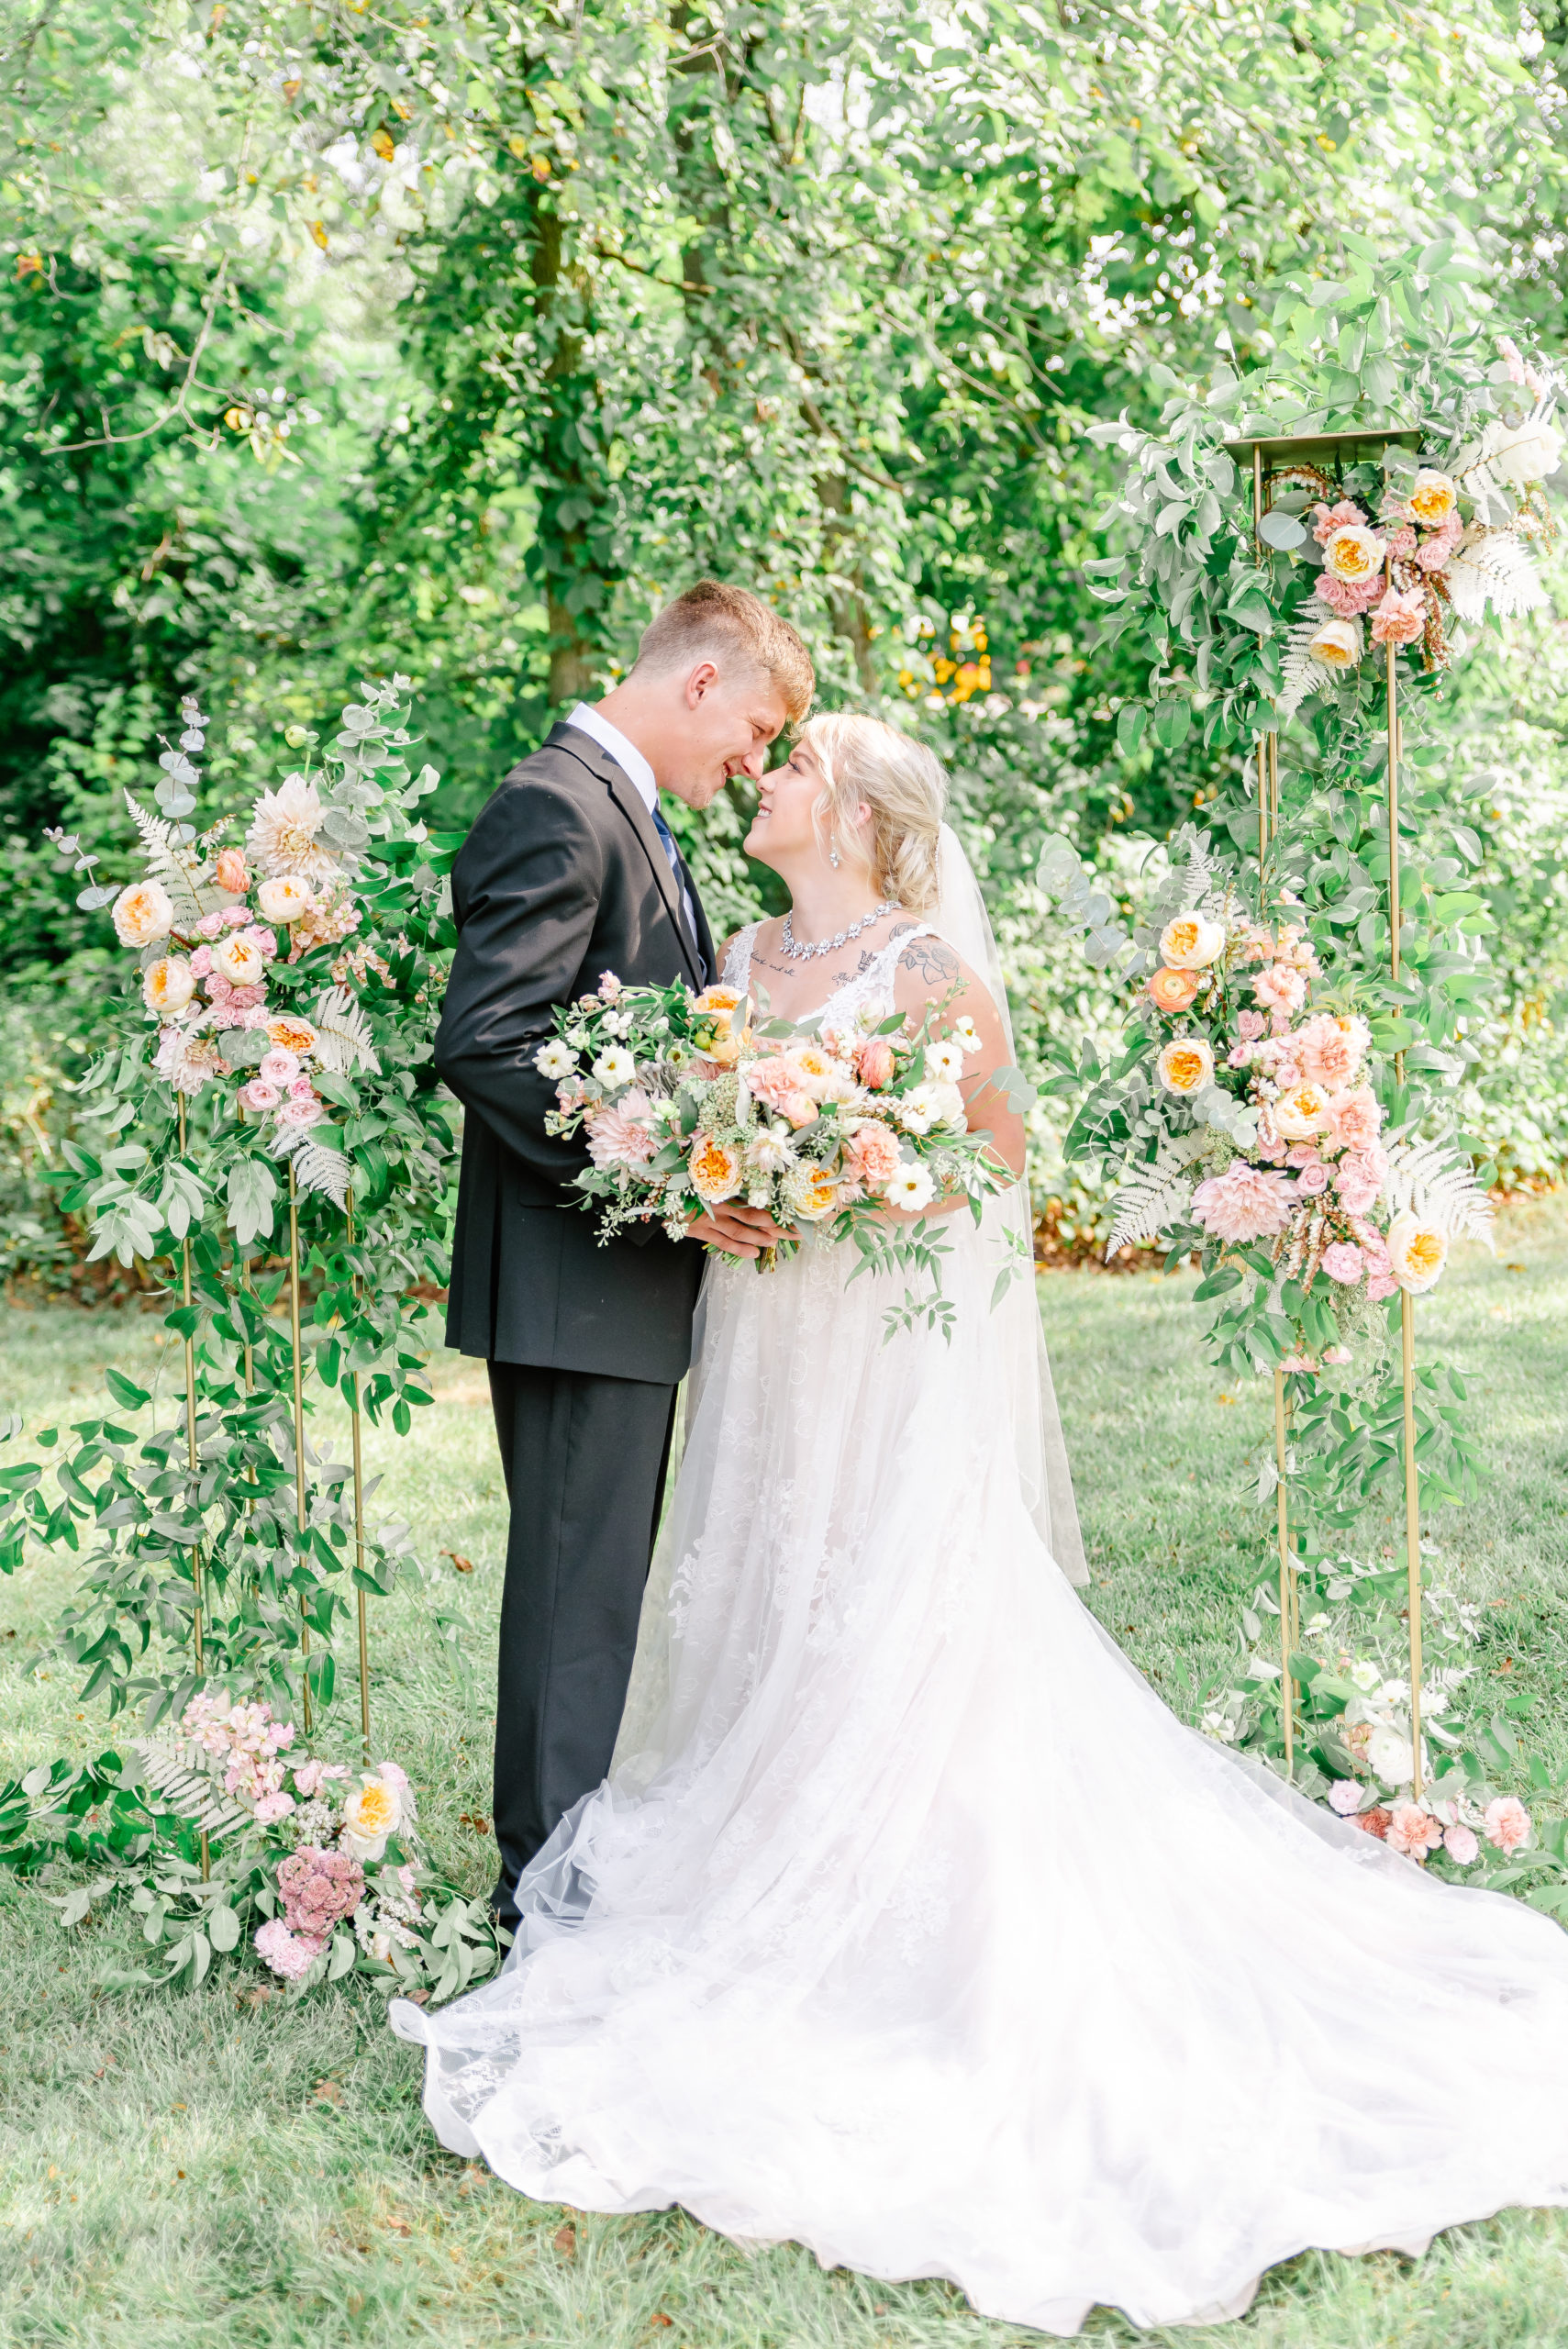 A bride and groom pose with a luxurious floral arbor on their wedding day.